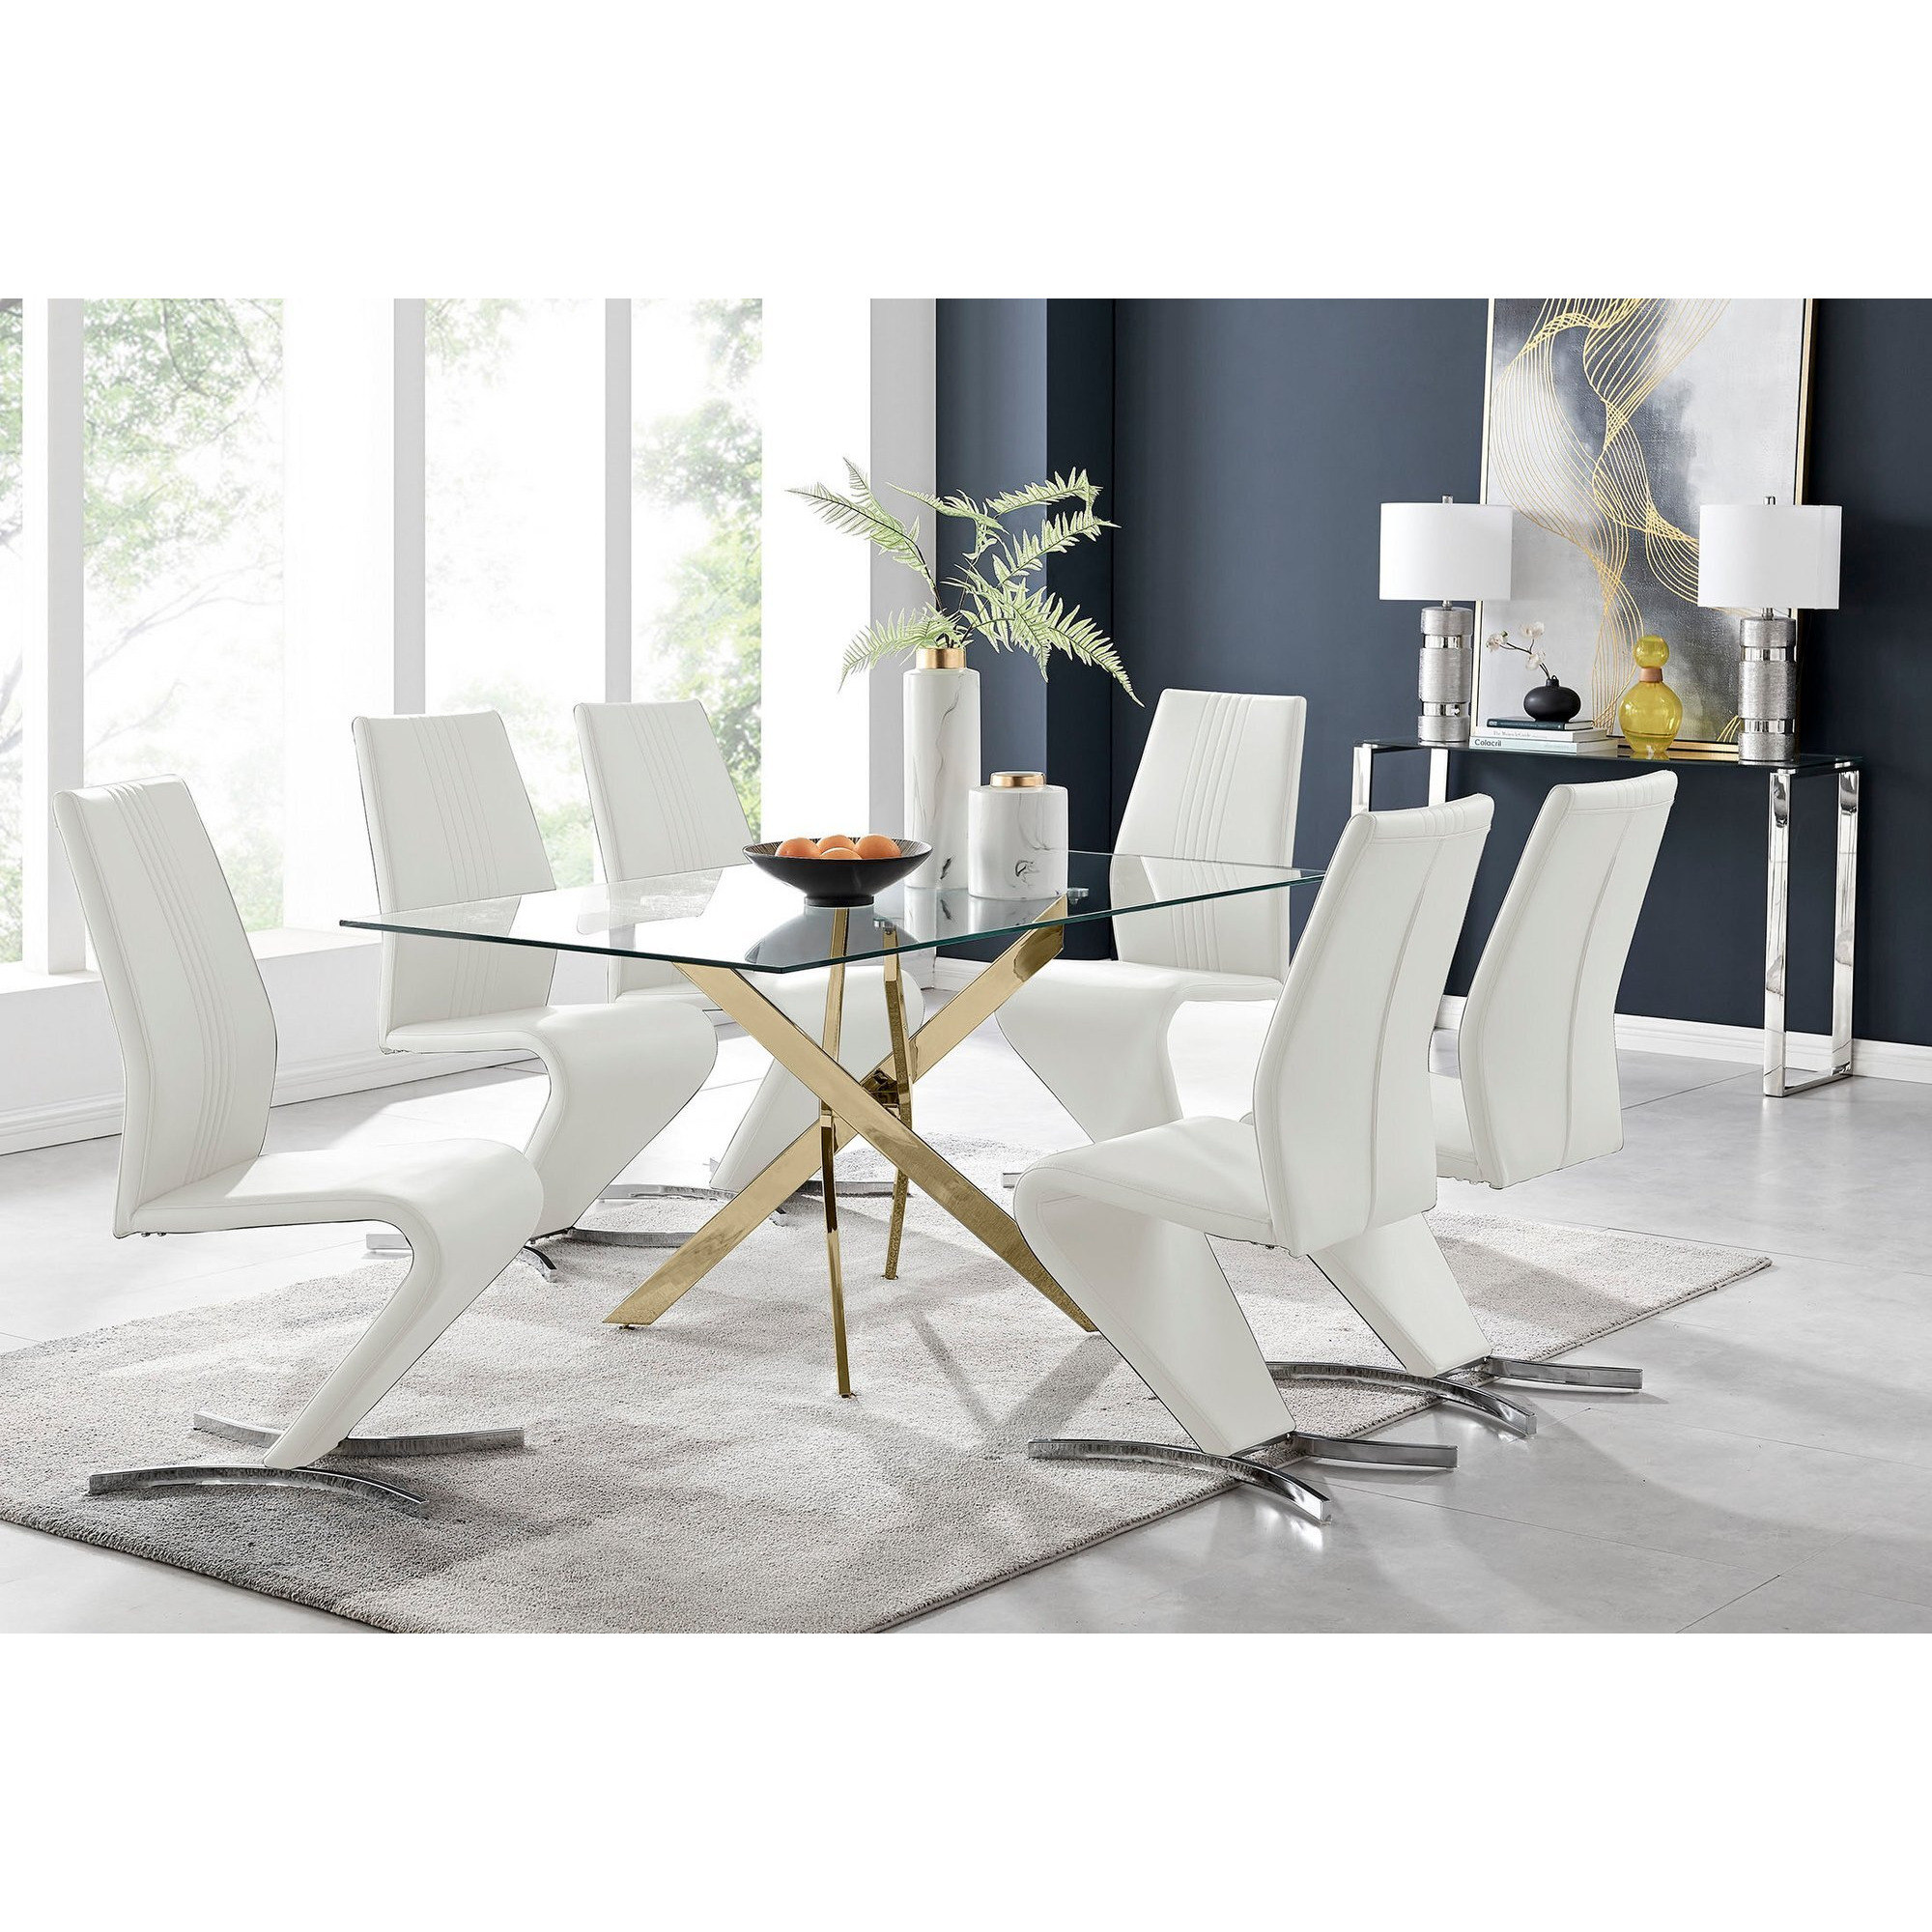 Leonardo 6 Gold Dining Table and 6 Willow Chairs